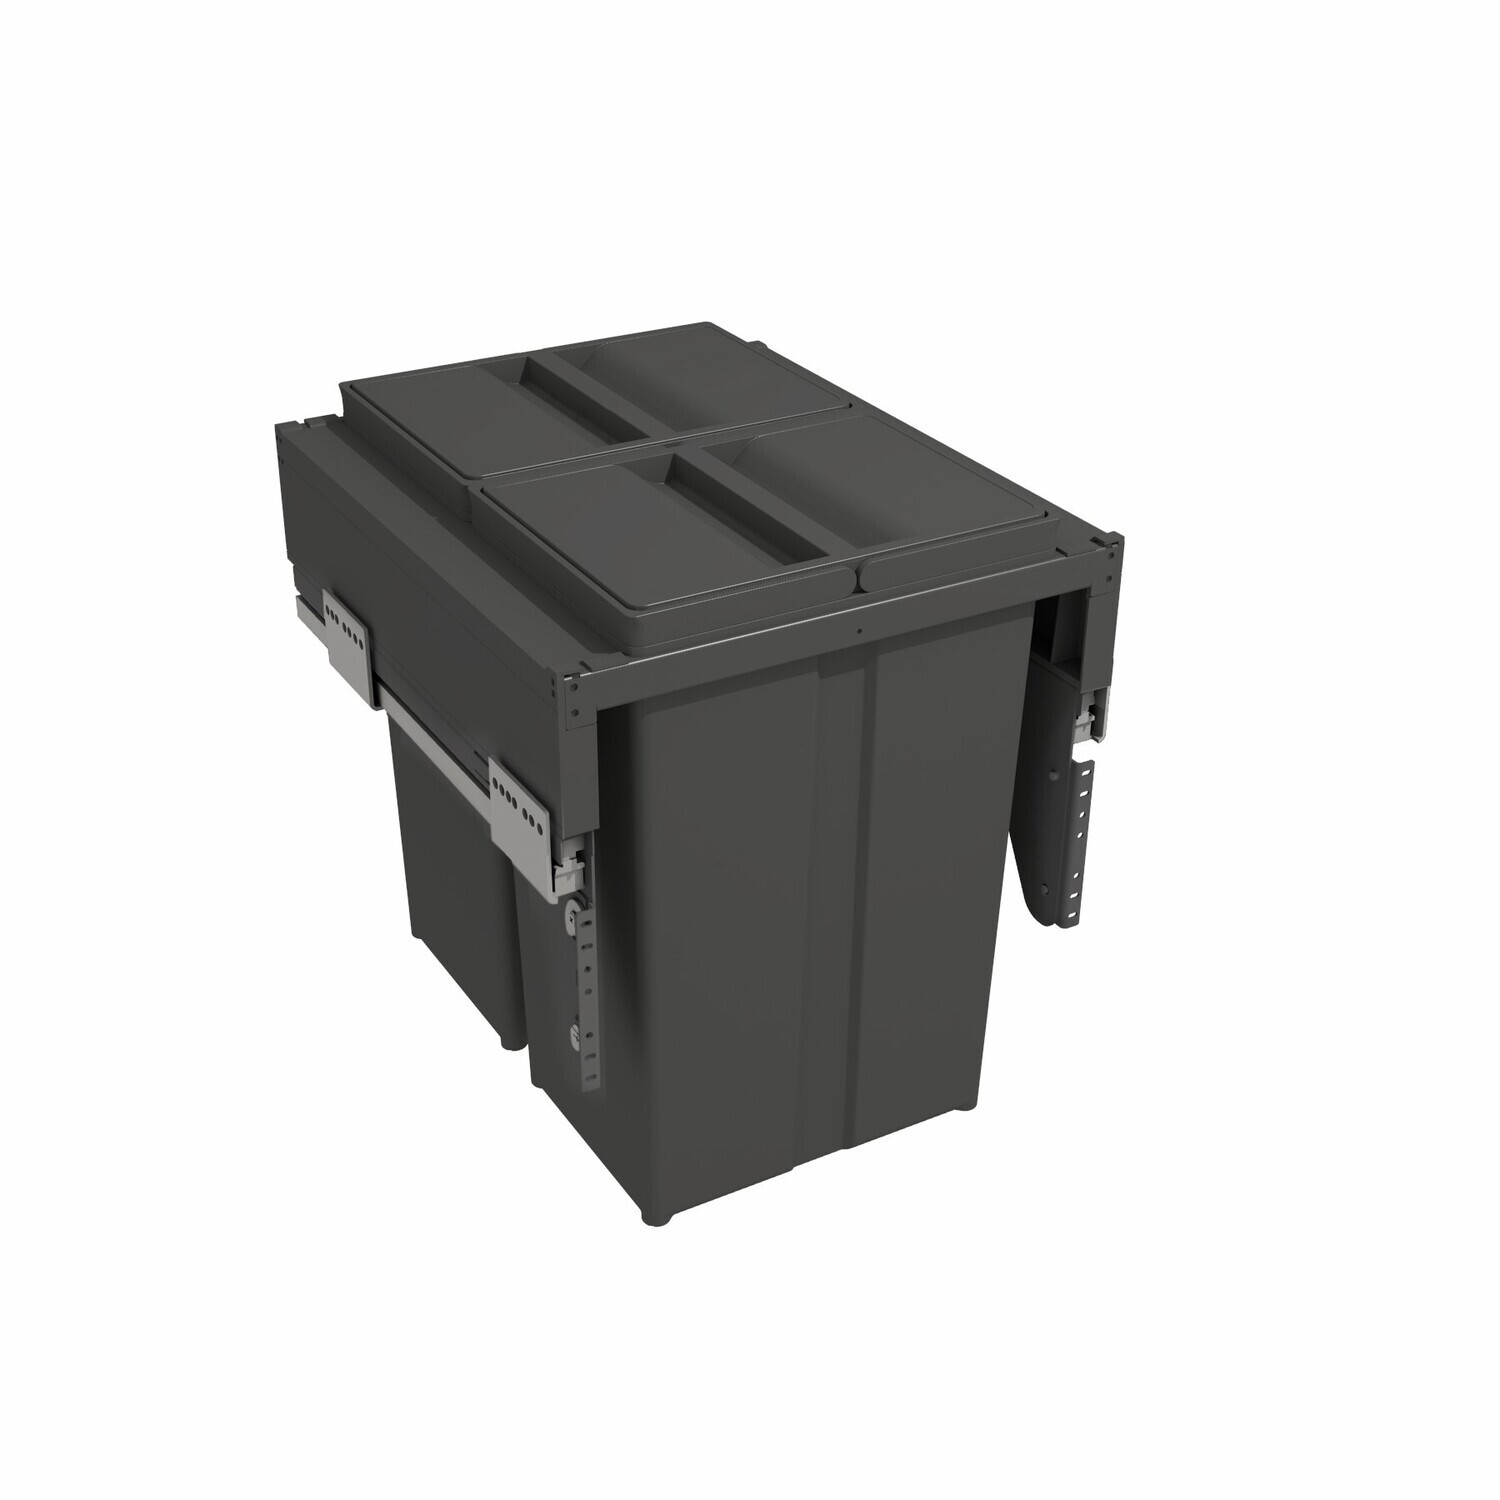 58 litre Anthracite Bin to Suit 450mm Cabinet.